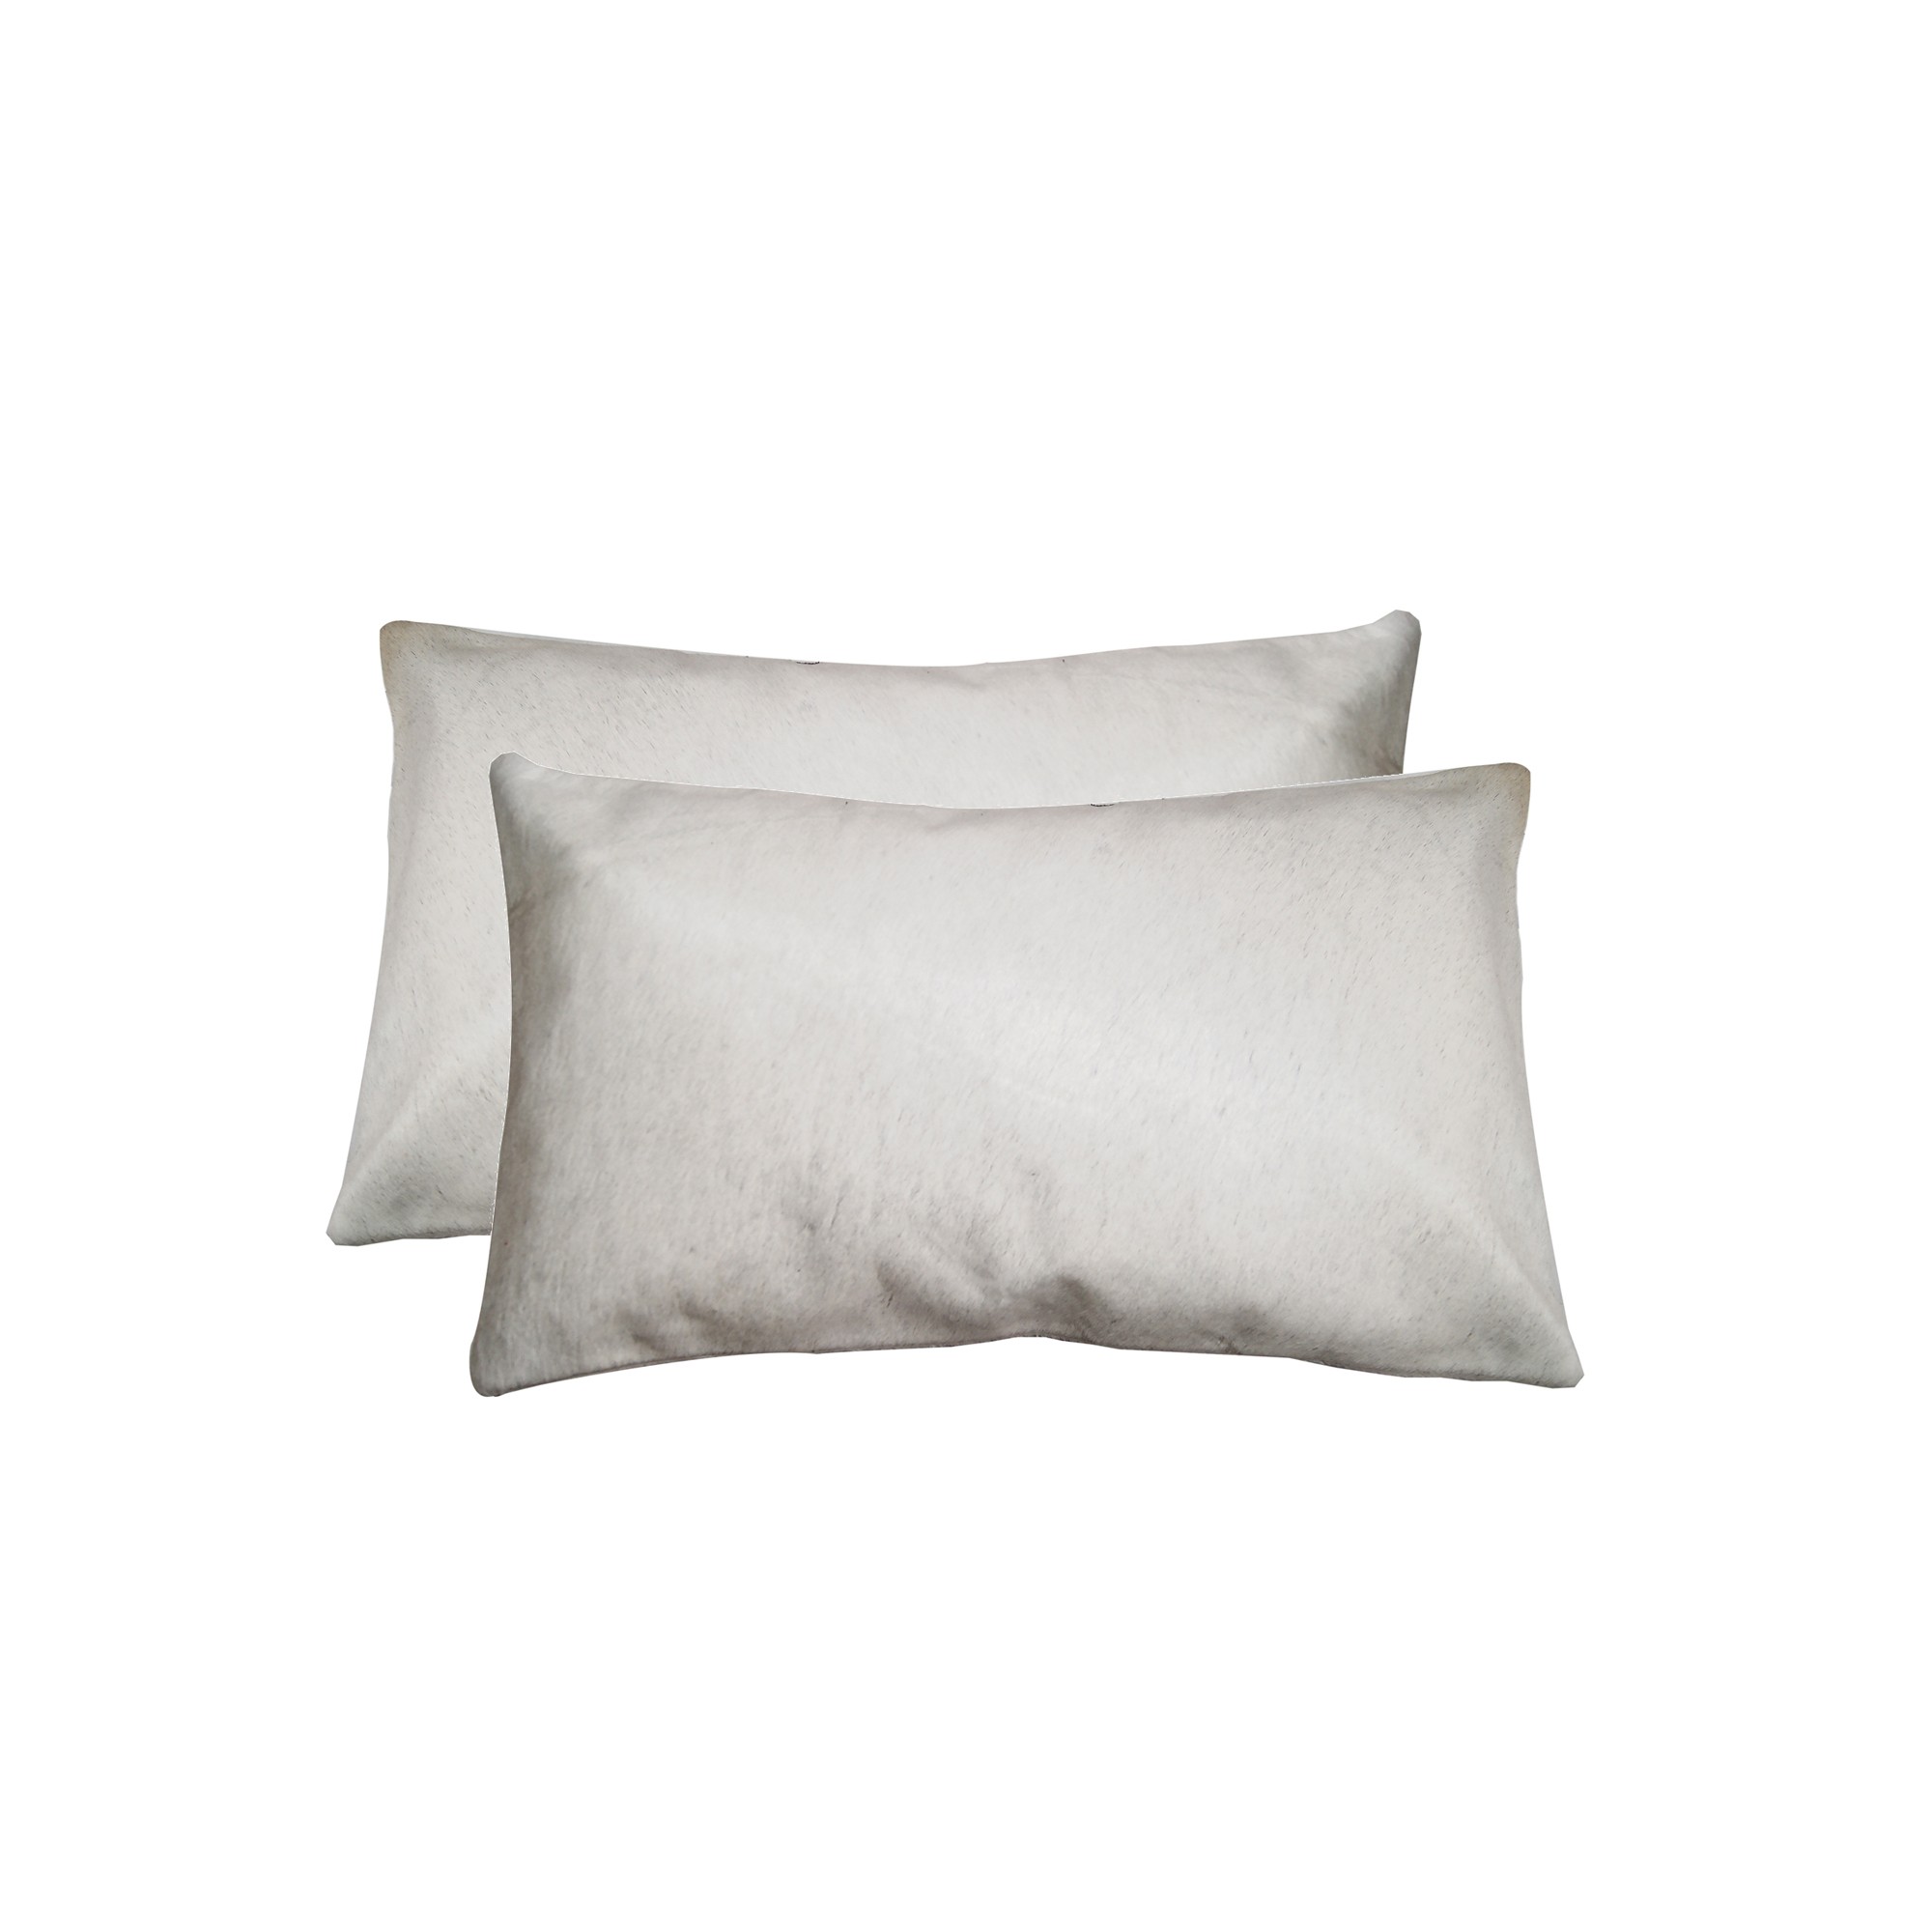 12" x 20" x 5" Off White, Cowhide - Pillow 2-Pack